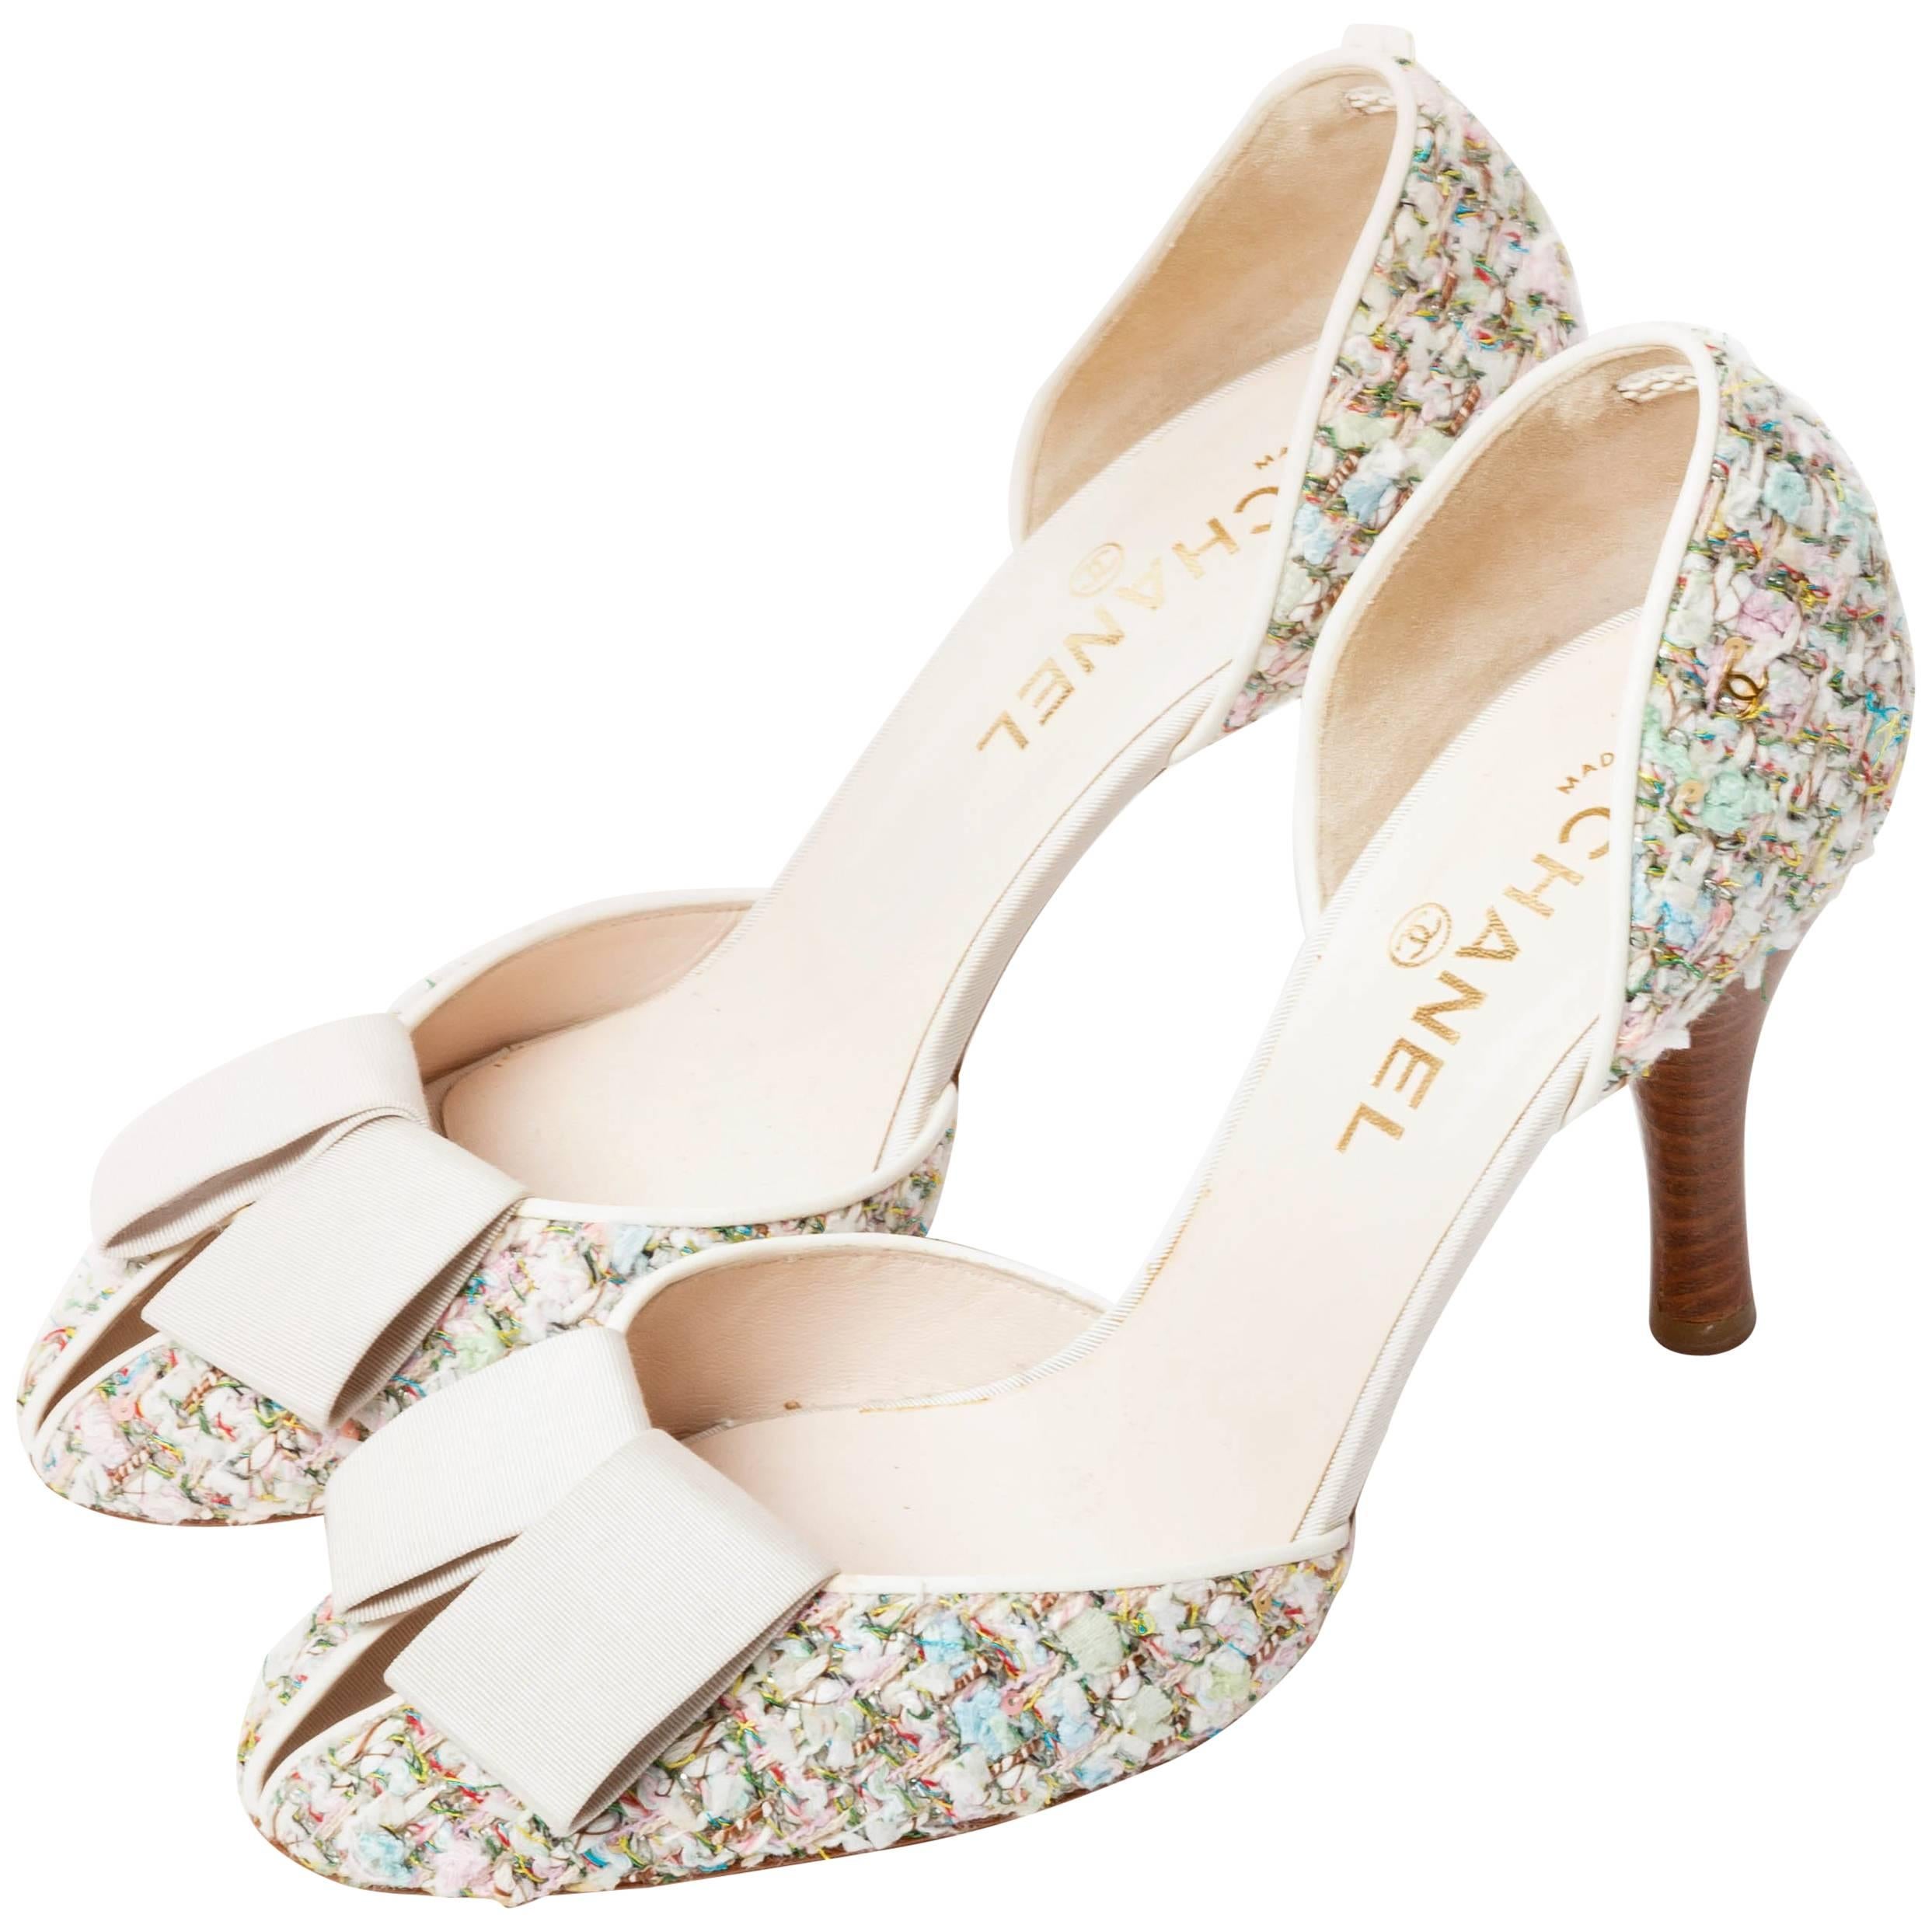 Chanel  Pastel Tweed D'Orsay Pumps with Grosgrain Ribbon Bows